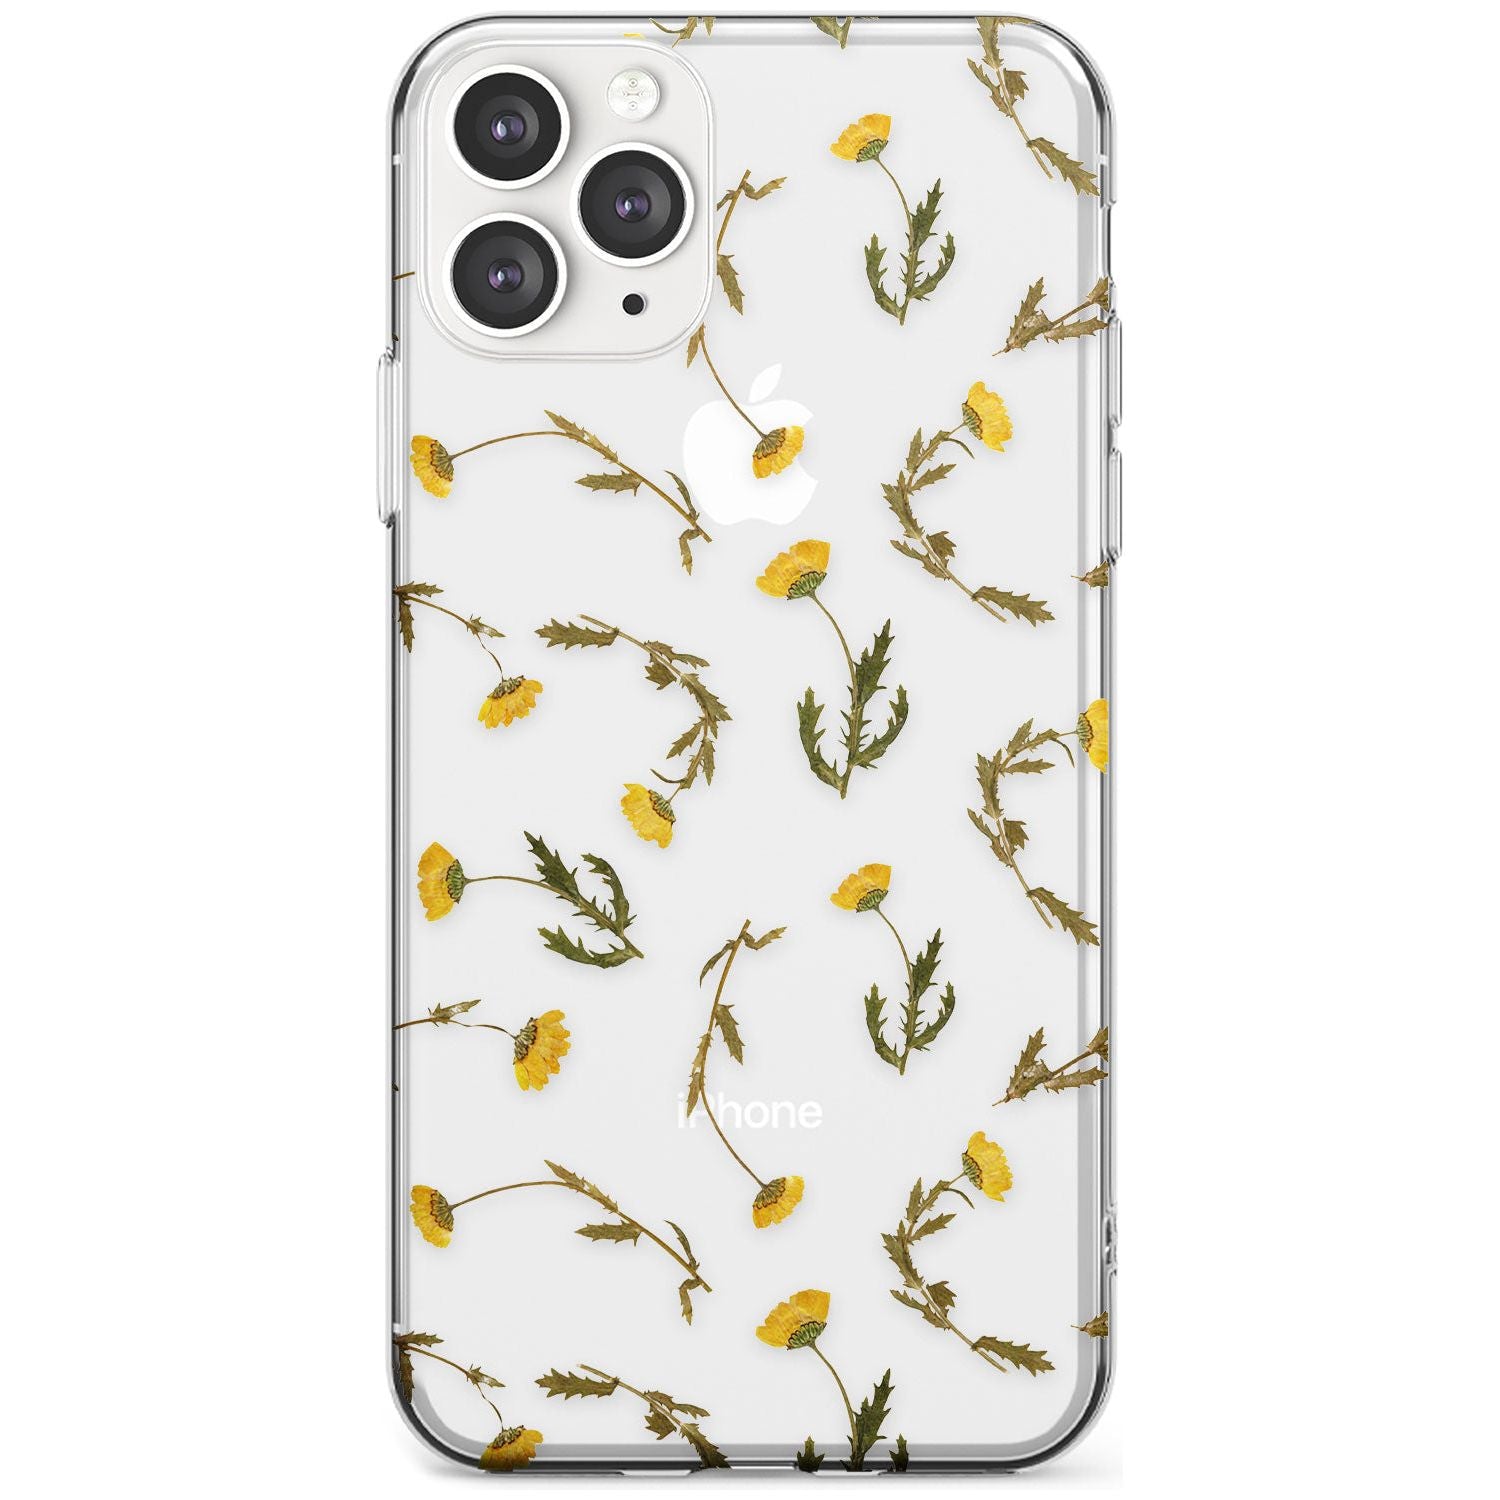 Long Stemmed Wildflowers - Dried Flower-Inspired Slim TPU Phone Case for iPhone 11 Pro Max